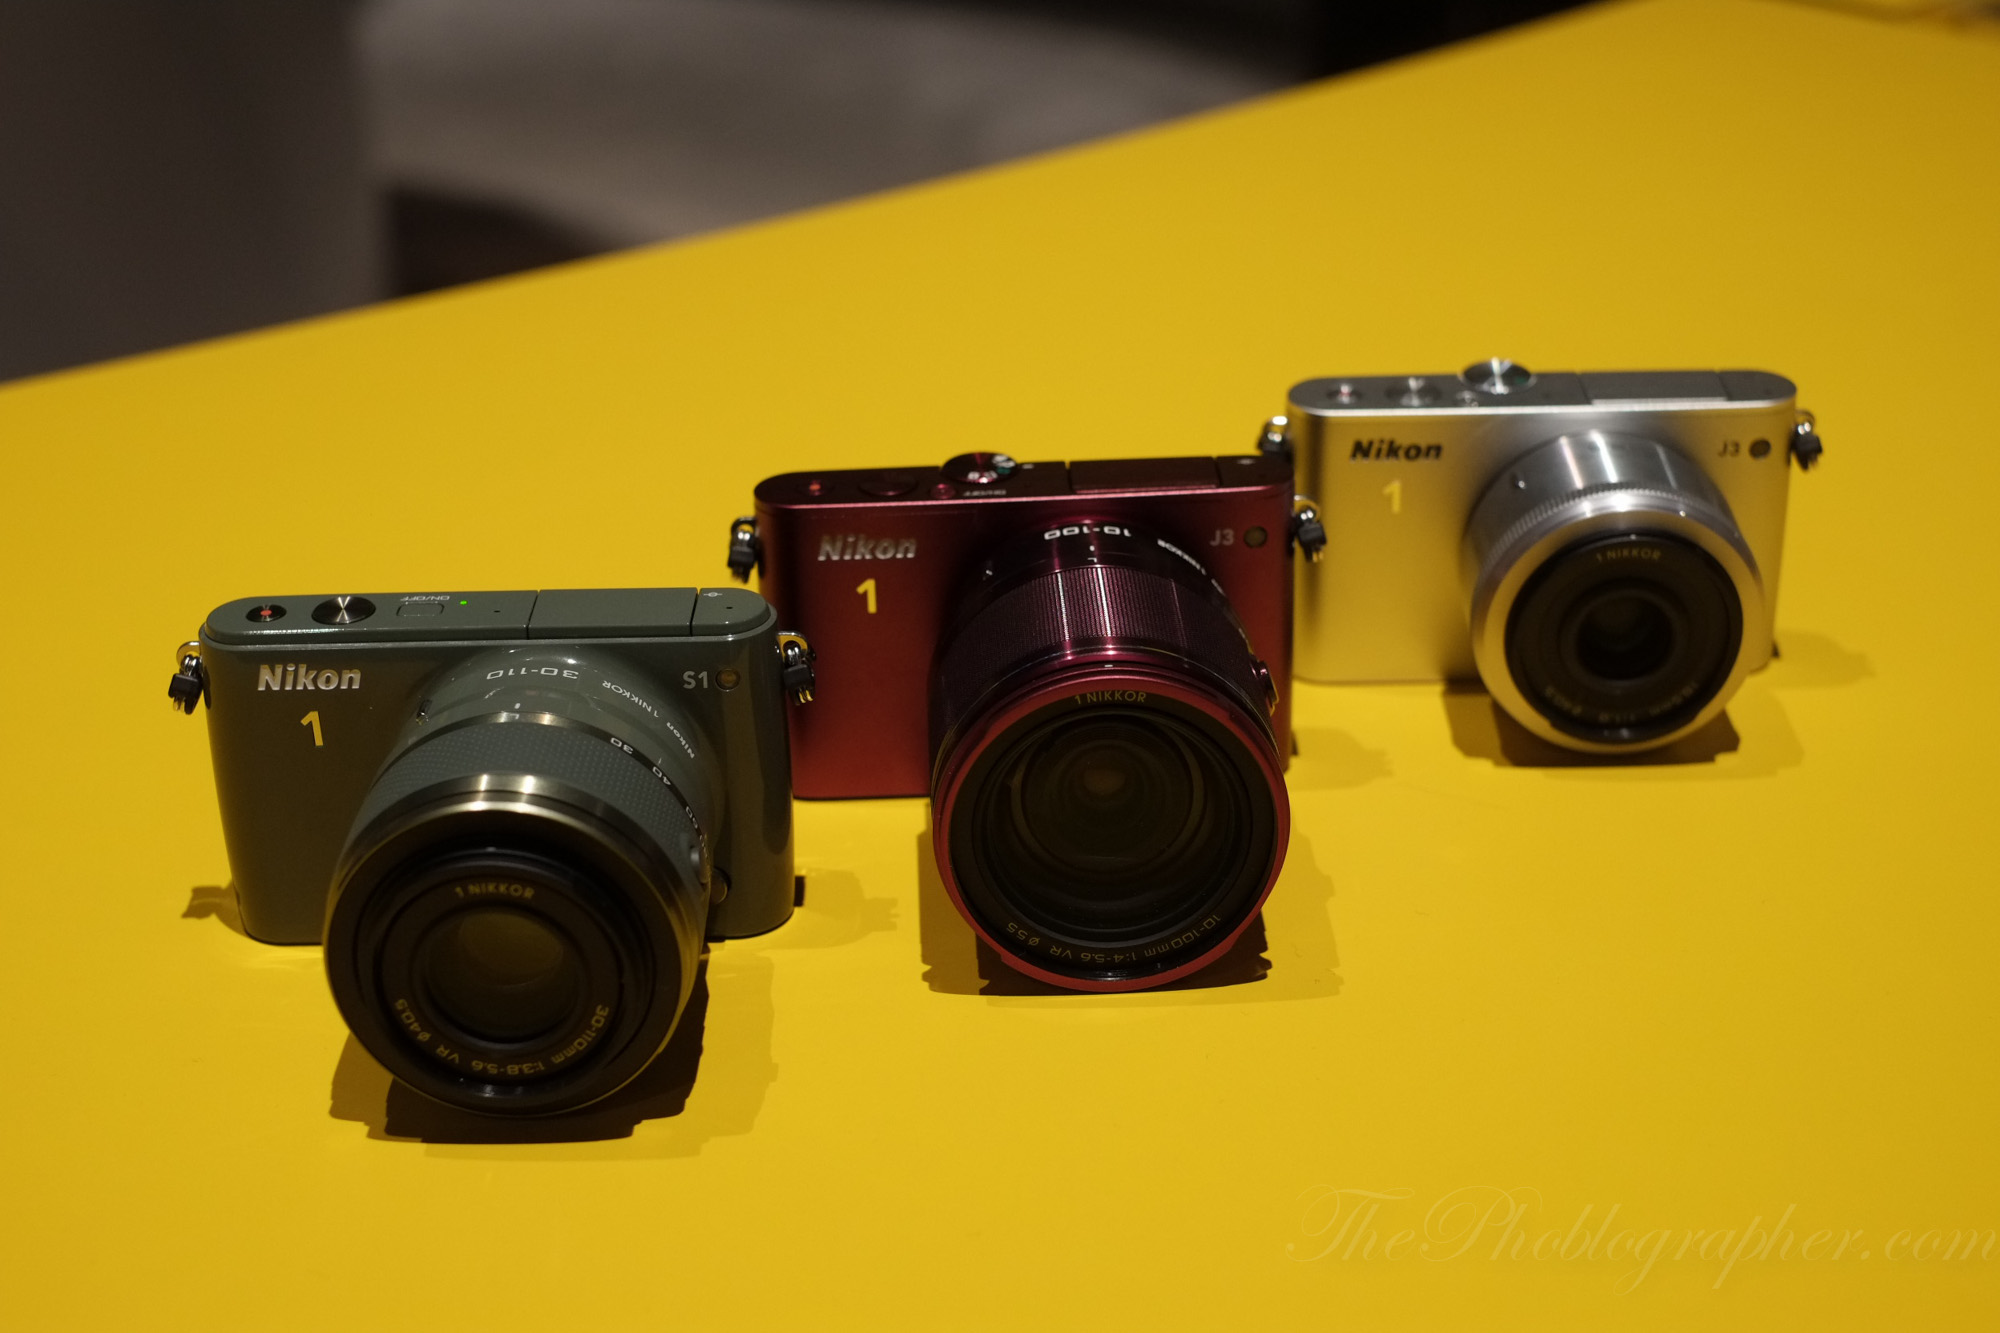 Nikon May Introduce More Mirrorless Varieties with a New 1 J4 and 18-300mm Lens